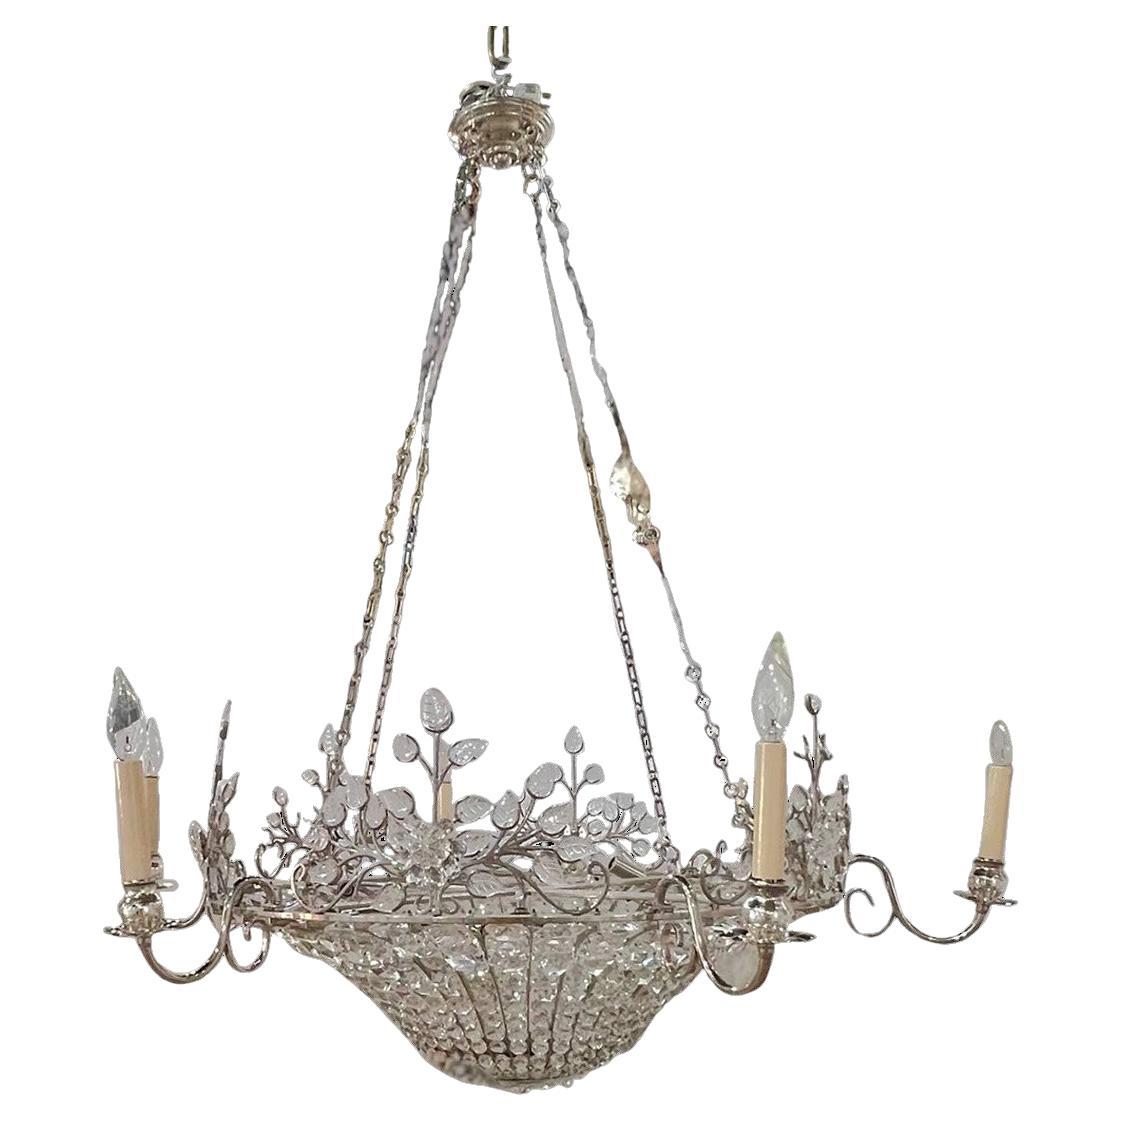 1930's French Silver Plated Crystals Chandelier with 12 Lights